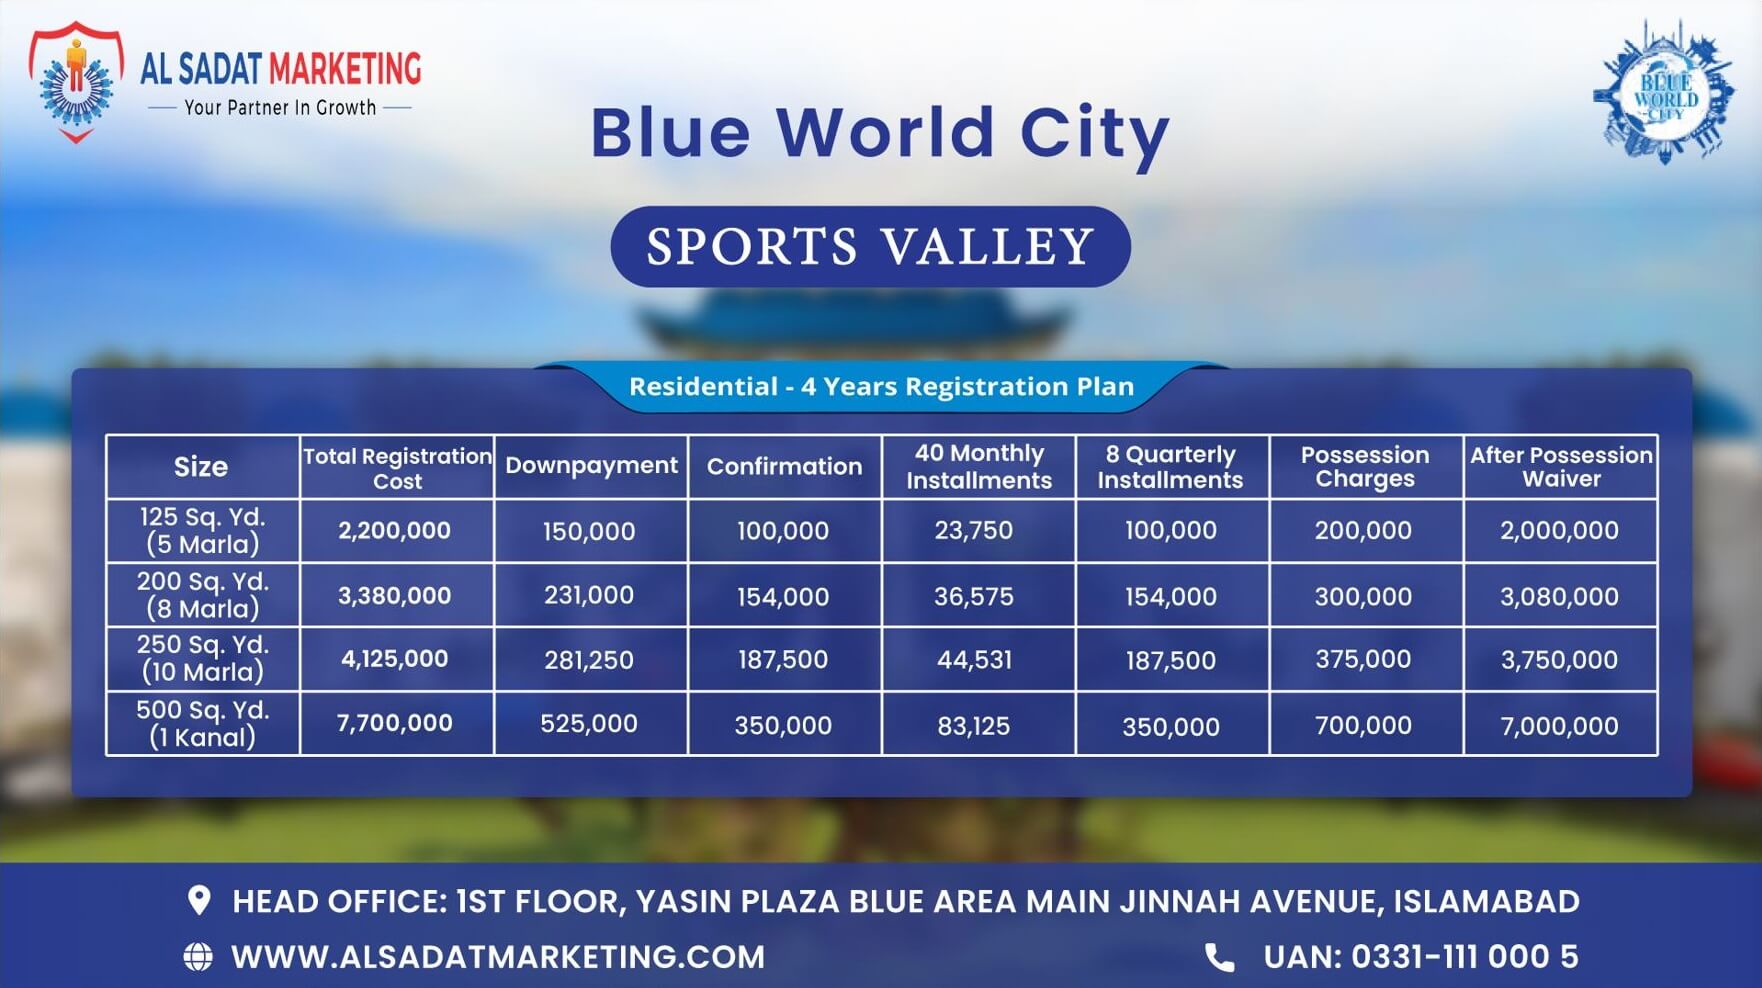 blue world city residential plots payment plan – blue world city islamabad residential plots payment plan – blue world city rawalpindi residential plots payment plan – blue world city sports valley payment plan – blue world city islamabad sports valley payment plan – blue world city rawalpindi sports valley payment plan – blue world city payment plan – blue world city islamabad payment plan - blue world city rawalpindi payment plan – blue world city– blue world city islamabad – blue world city rawalpindi– blue world city housing society – blue world city islamabad housing society – blue world city real estate project – blue world city islamabad real estate project - al sadat marketing - alsadat marketing - al-sadat marketing